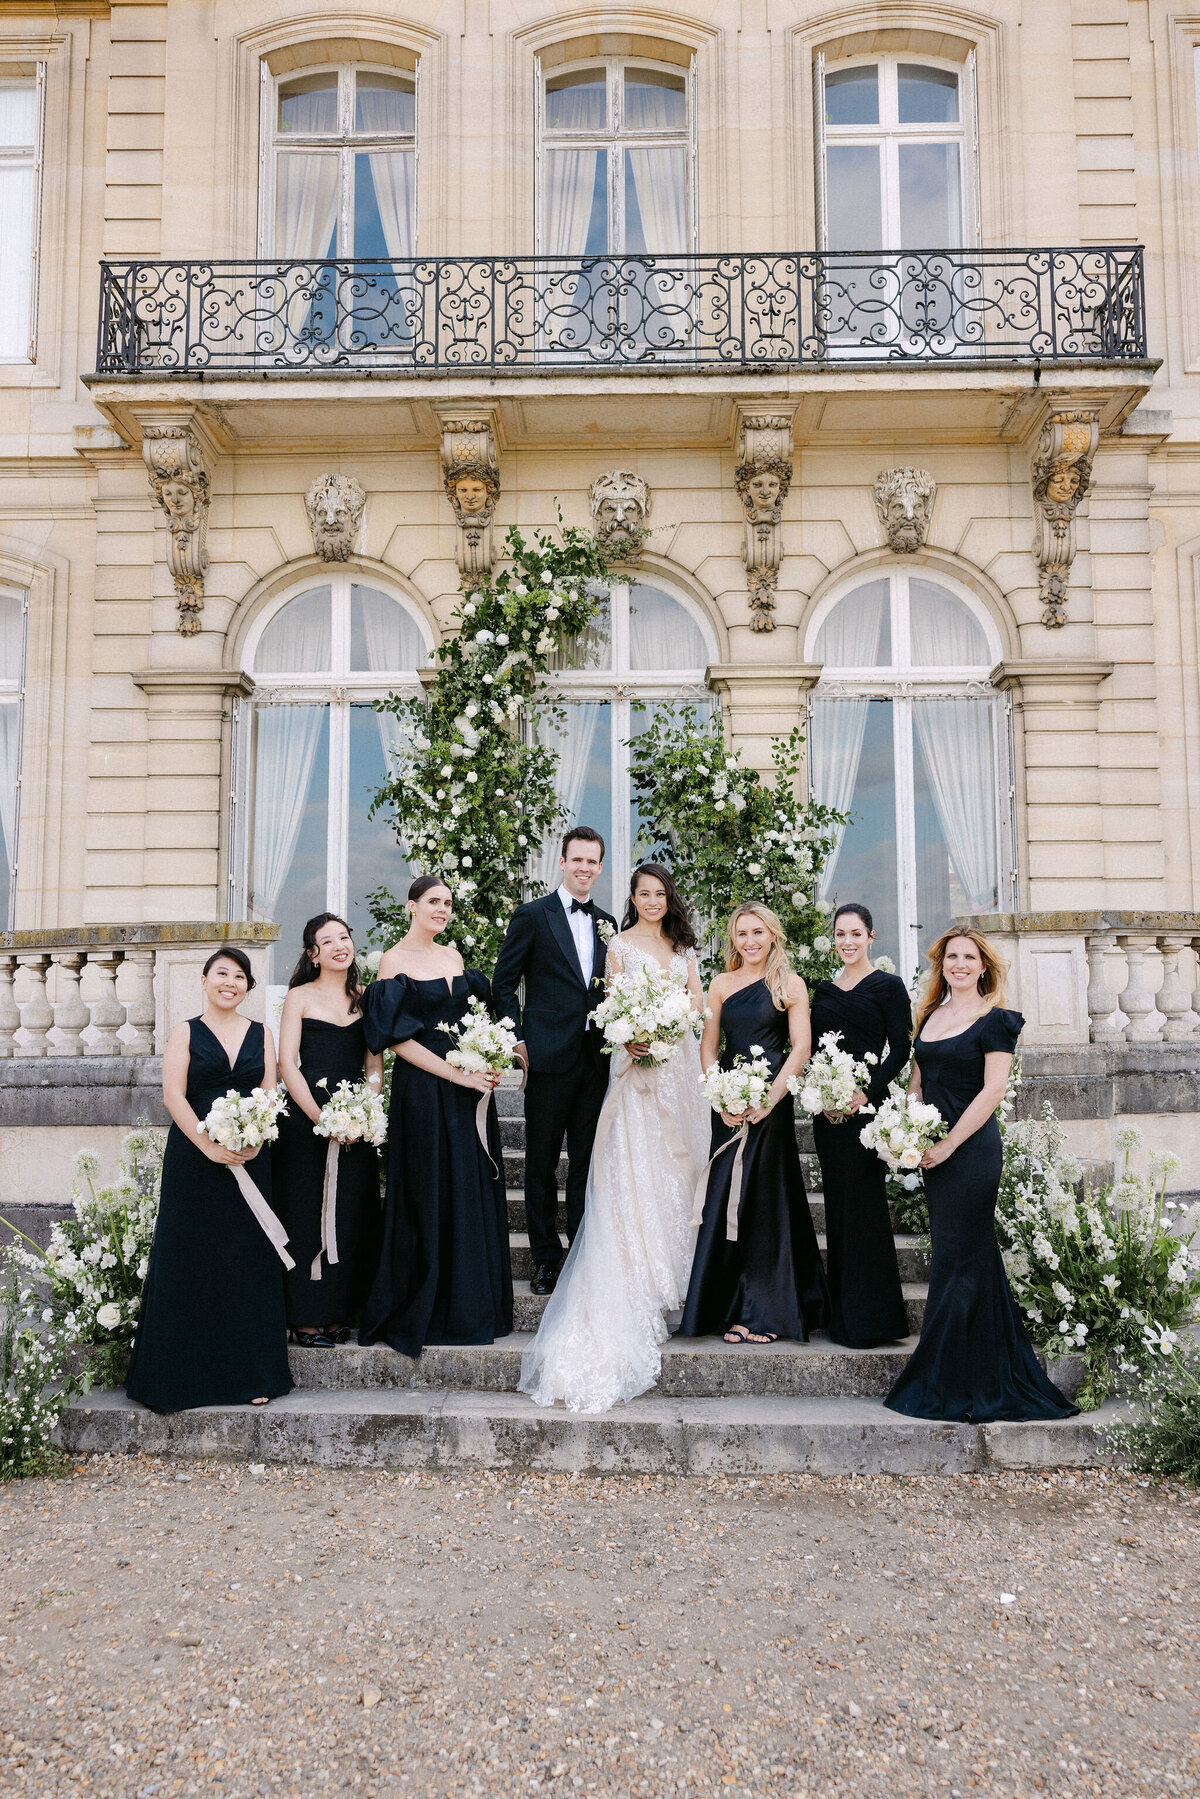 Jennifer Fox Weddings English speaking wedding planning & design agency in France crafting refined and bespoke weddings and celebrations Provence, Paris and destination 378